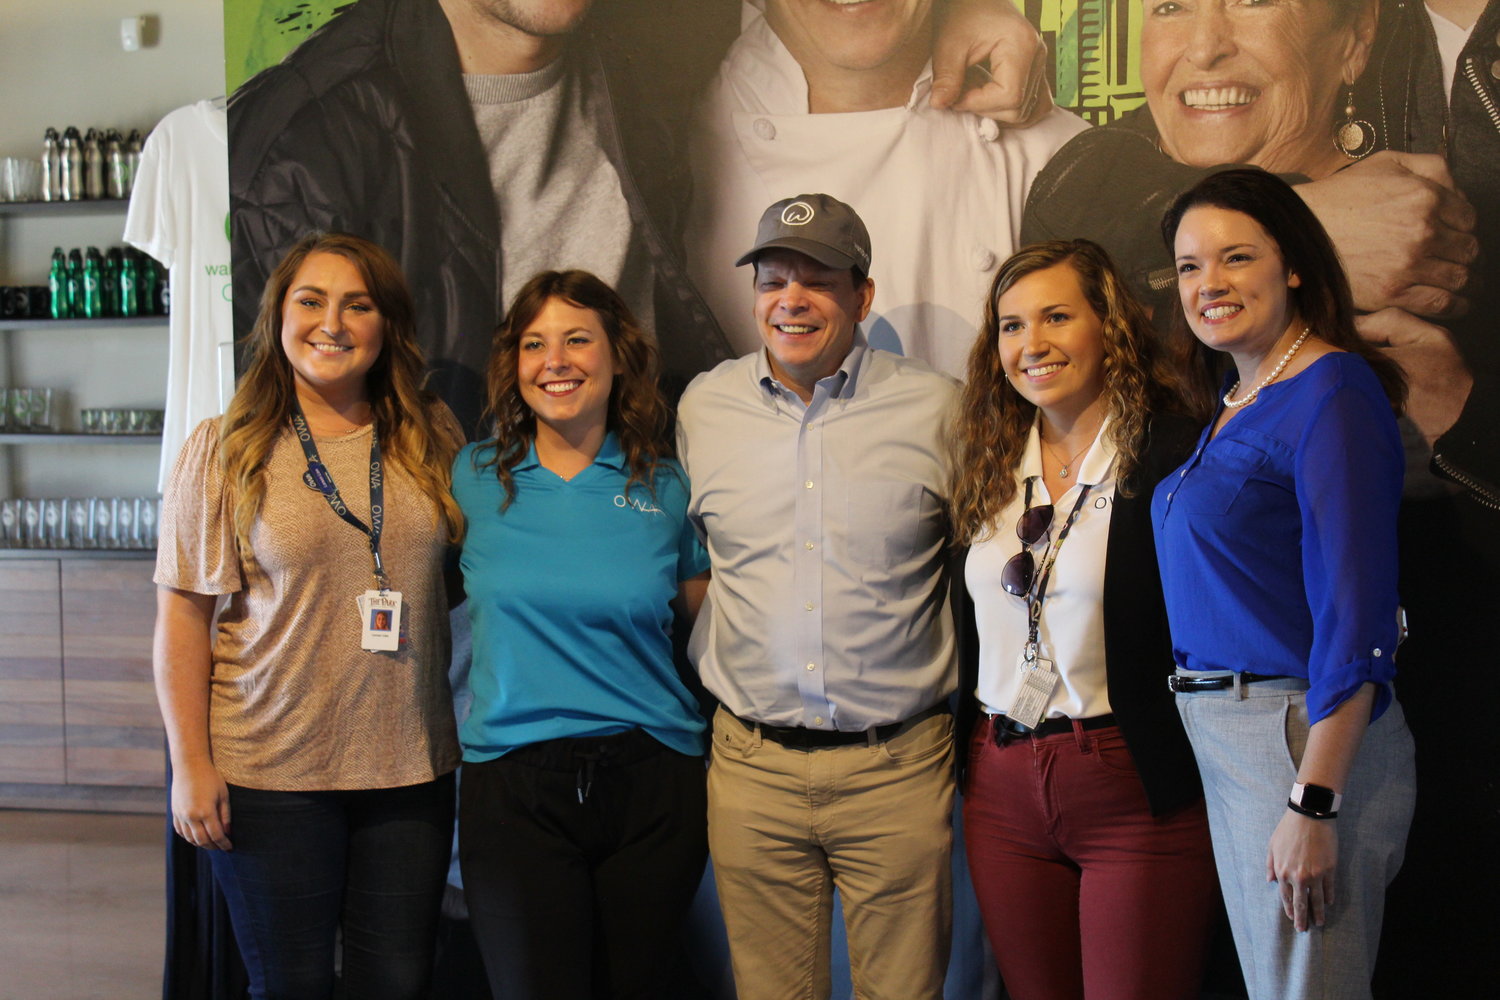 Paul Wahlberg visits the OWA Wahlburgers location.